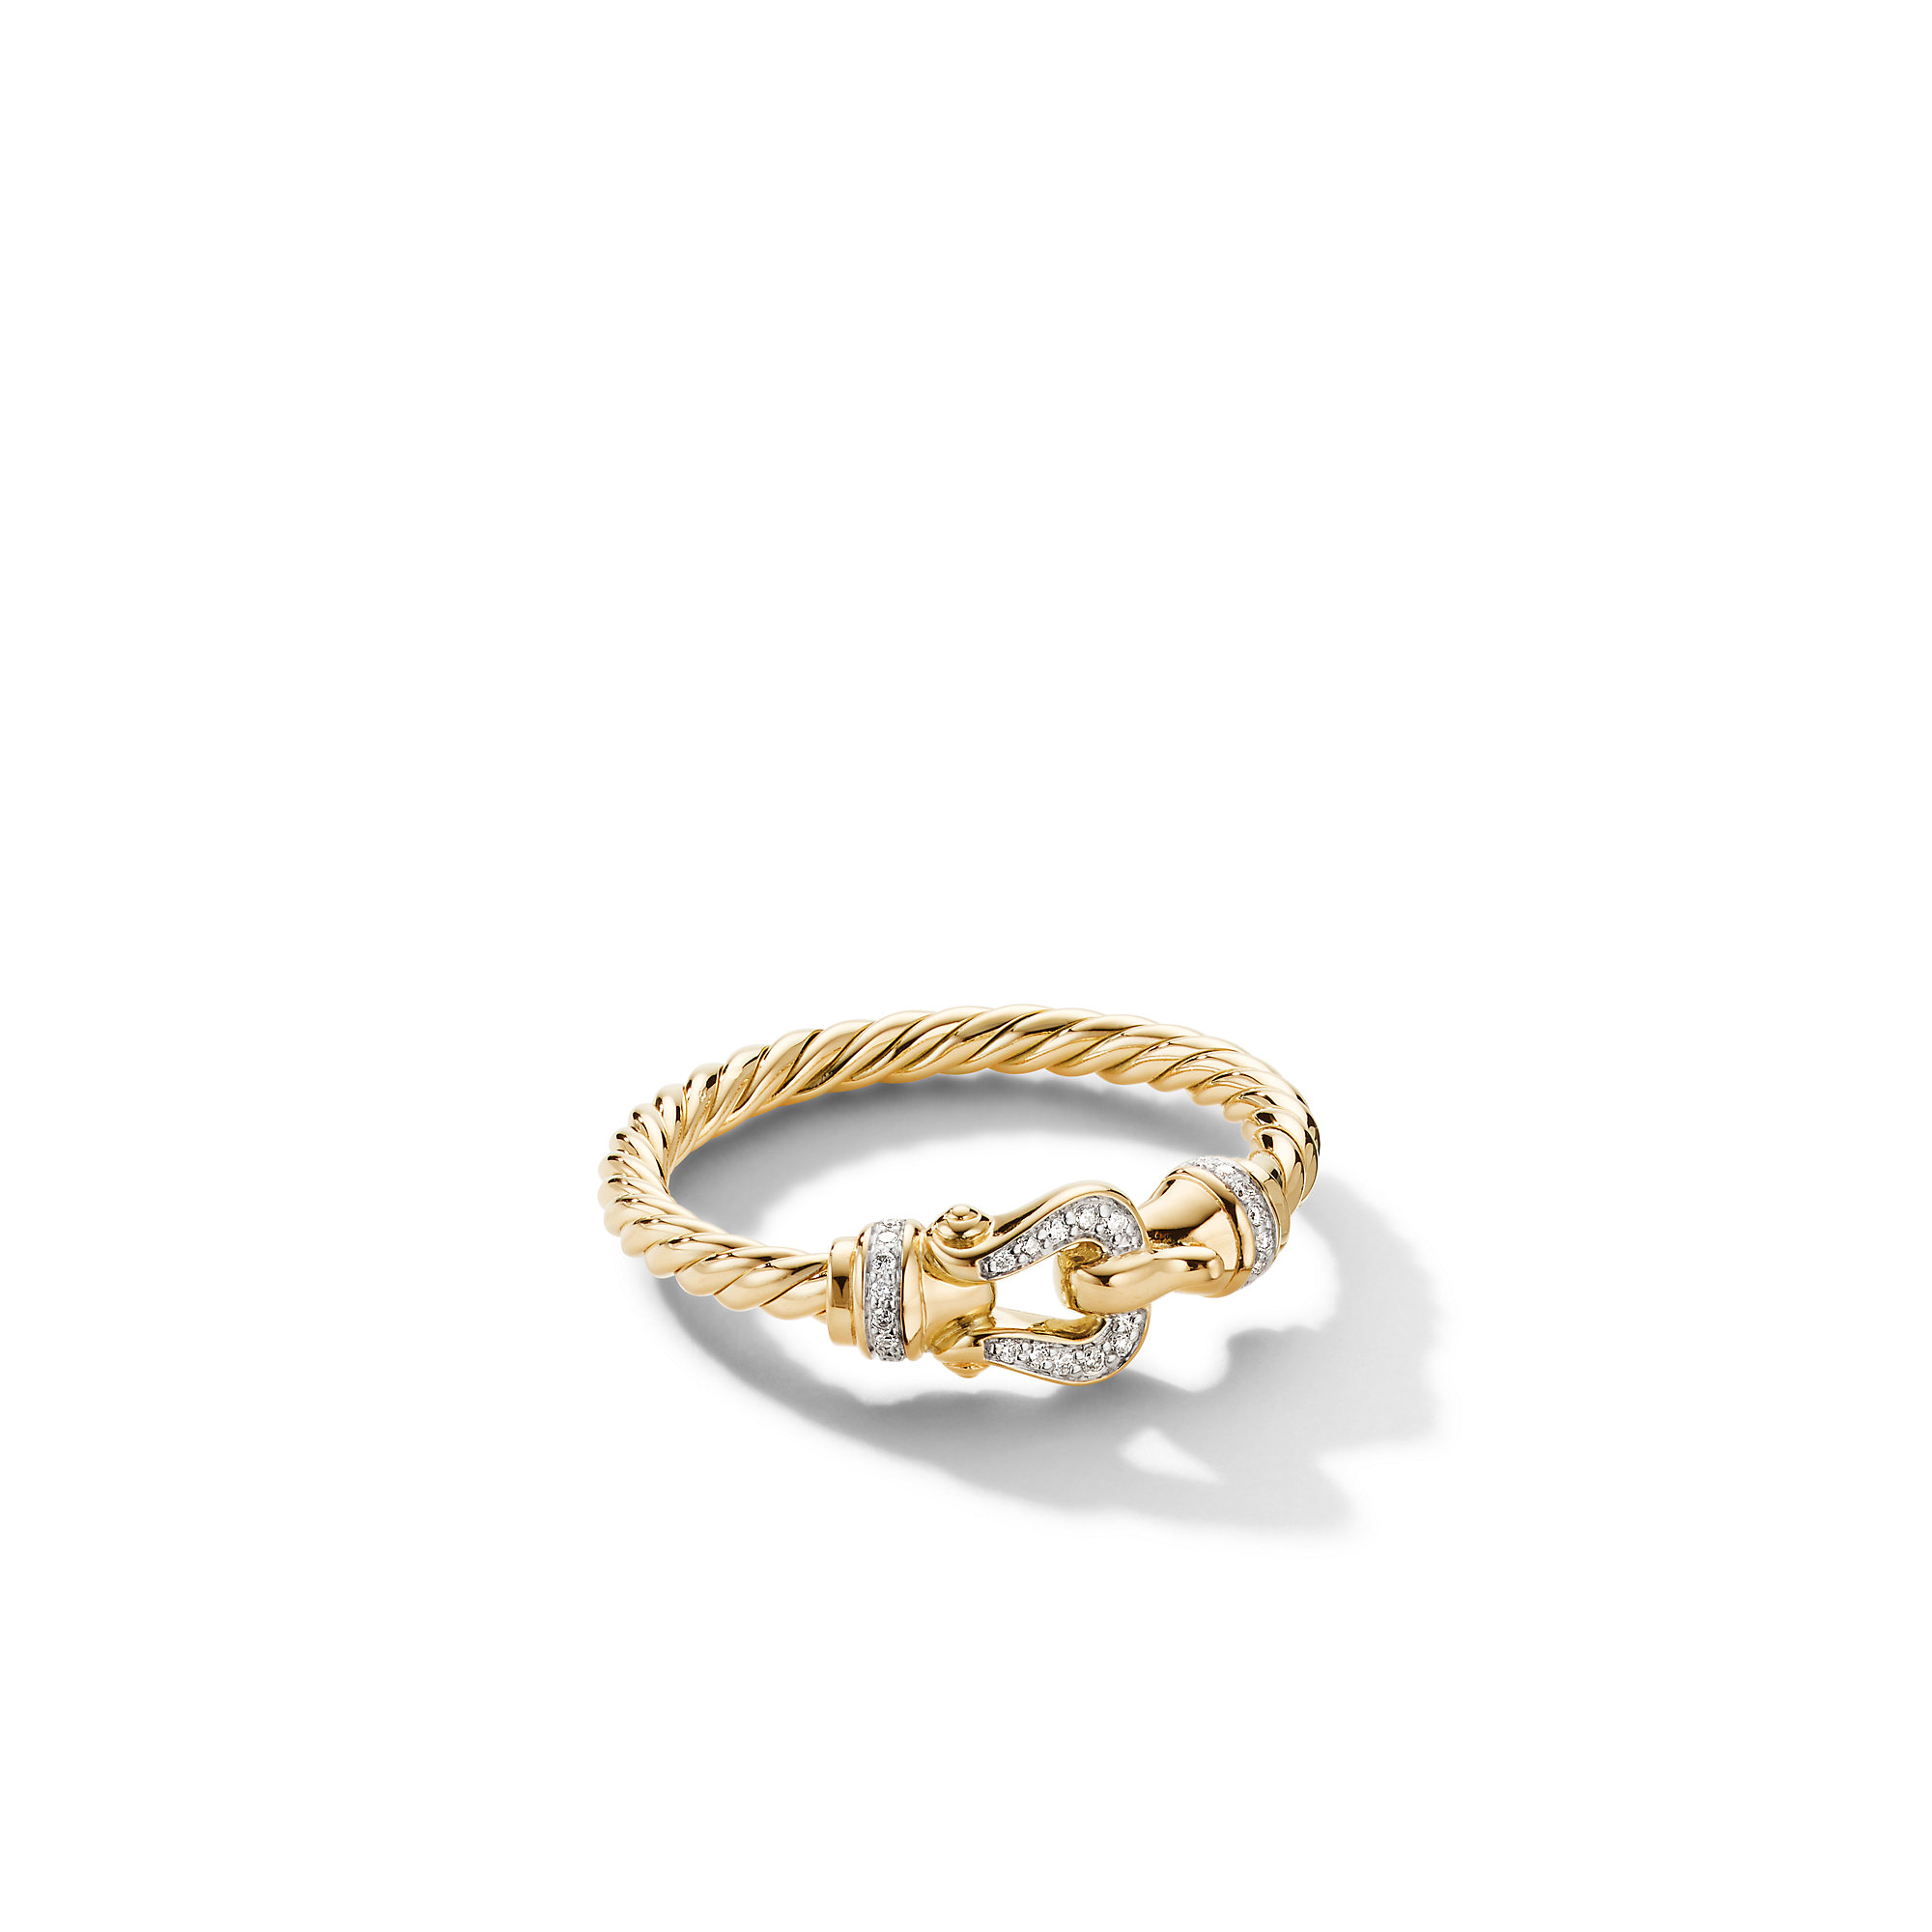 Petite Buckle Ring in 18K Yellow Gold with Diamonds